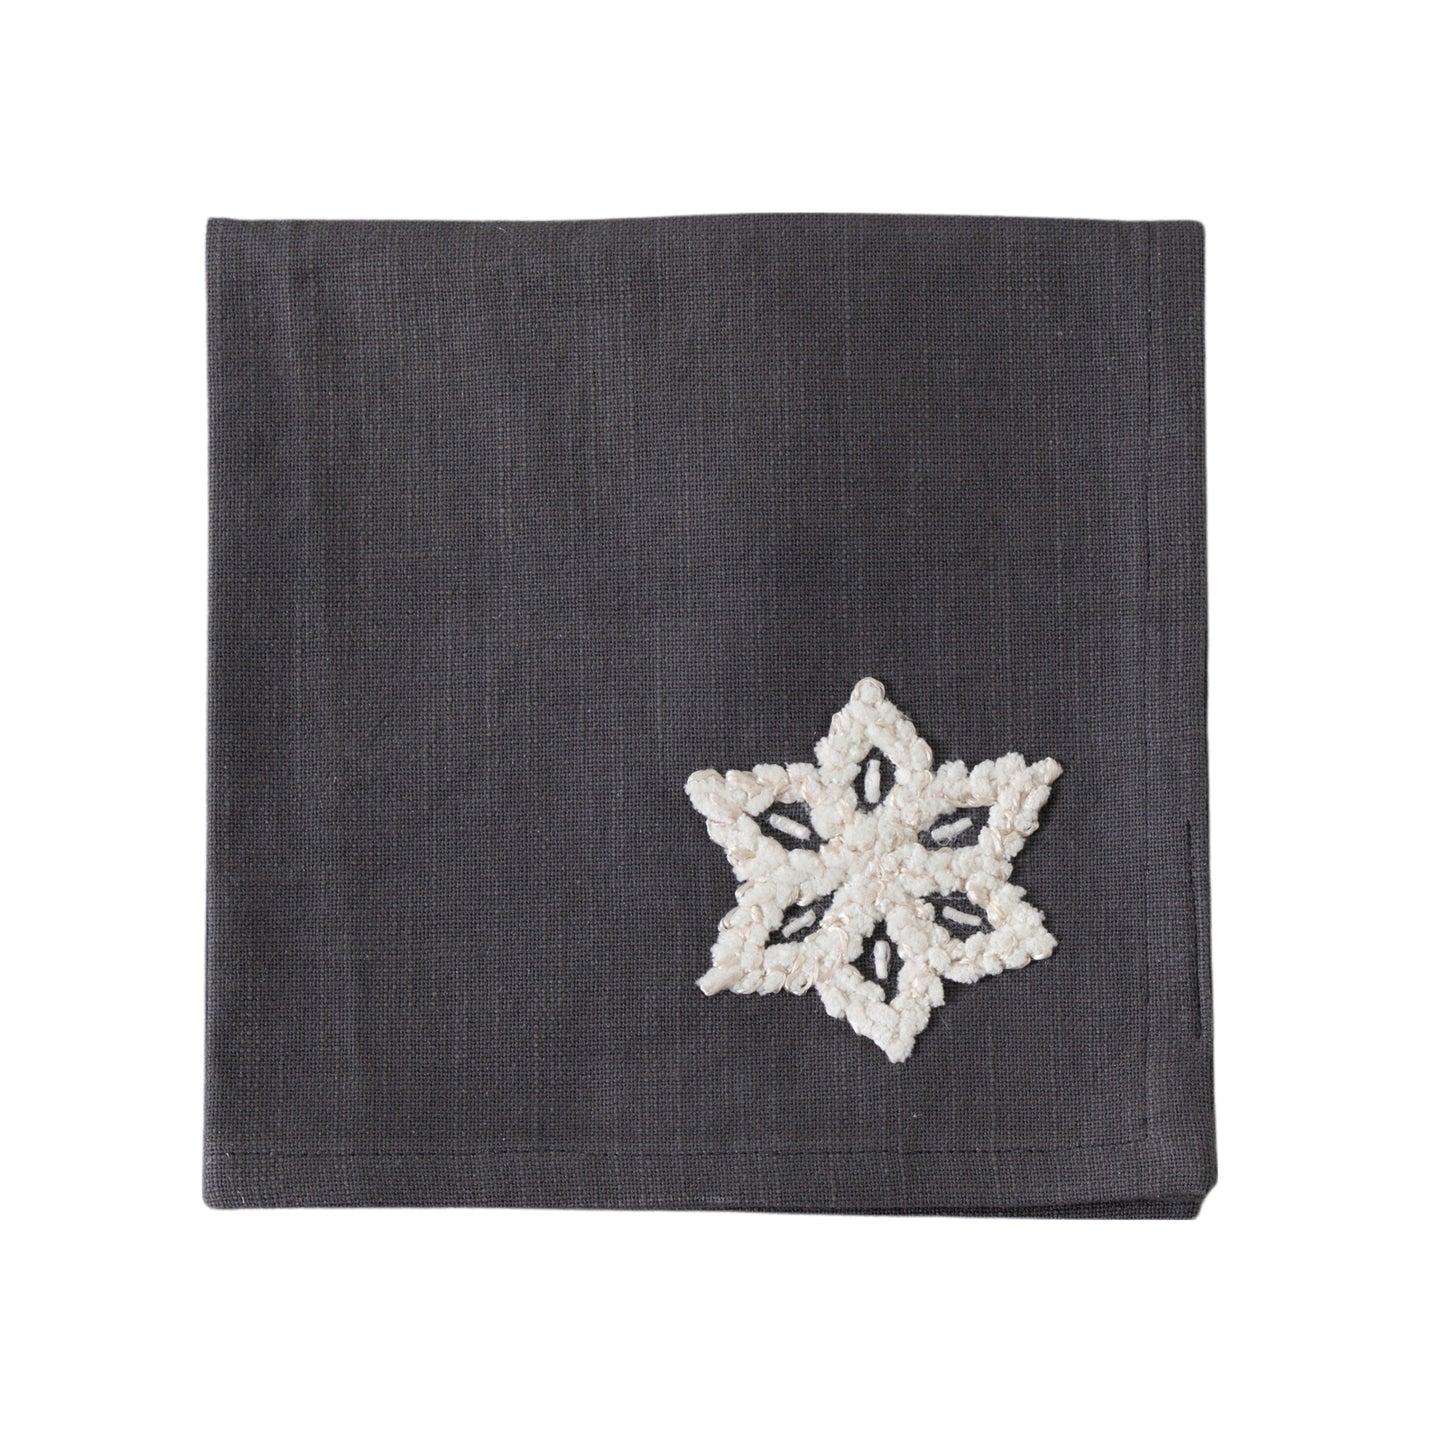 A Brist Snowflakes Napkin Charcoal 450x450mm (4pk) with white snowflake on it, perfect for interior decor.